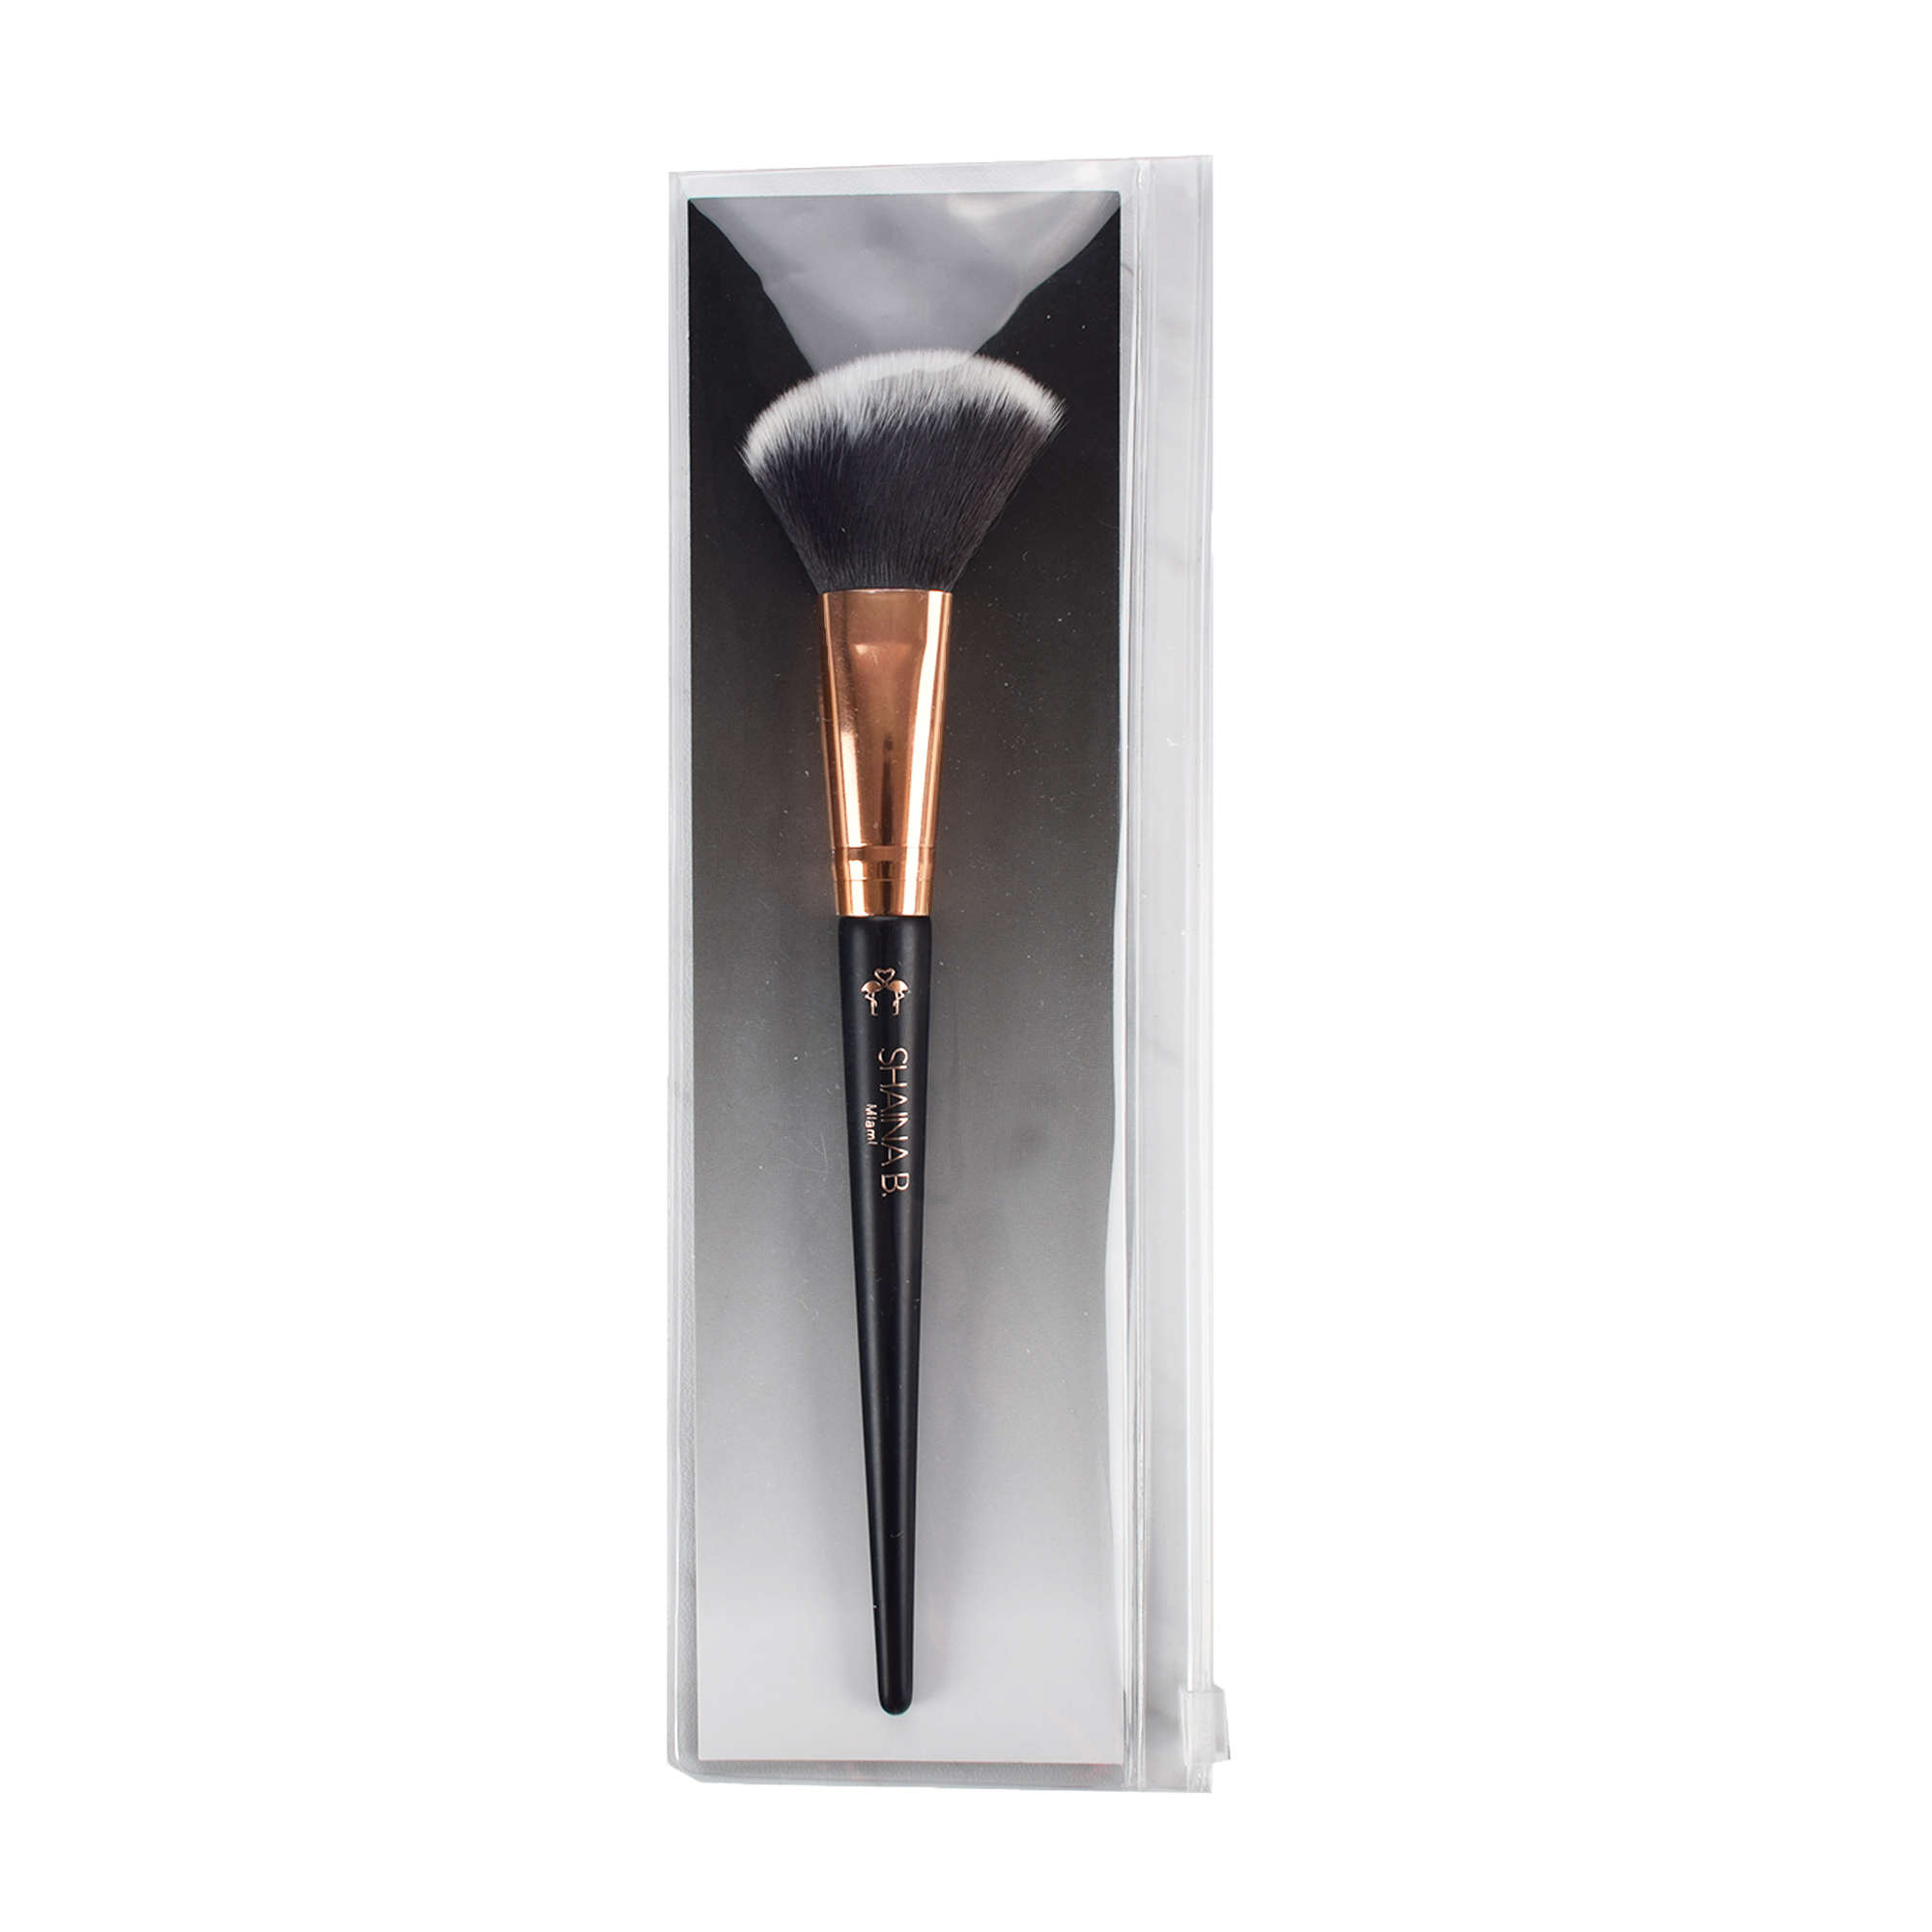 Elite B 103 Angled Contour Brush by FIRMA BEAUTY, Color, Tools, Brushes